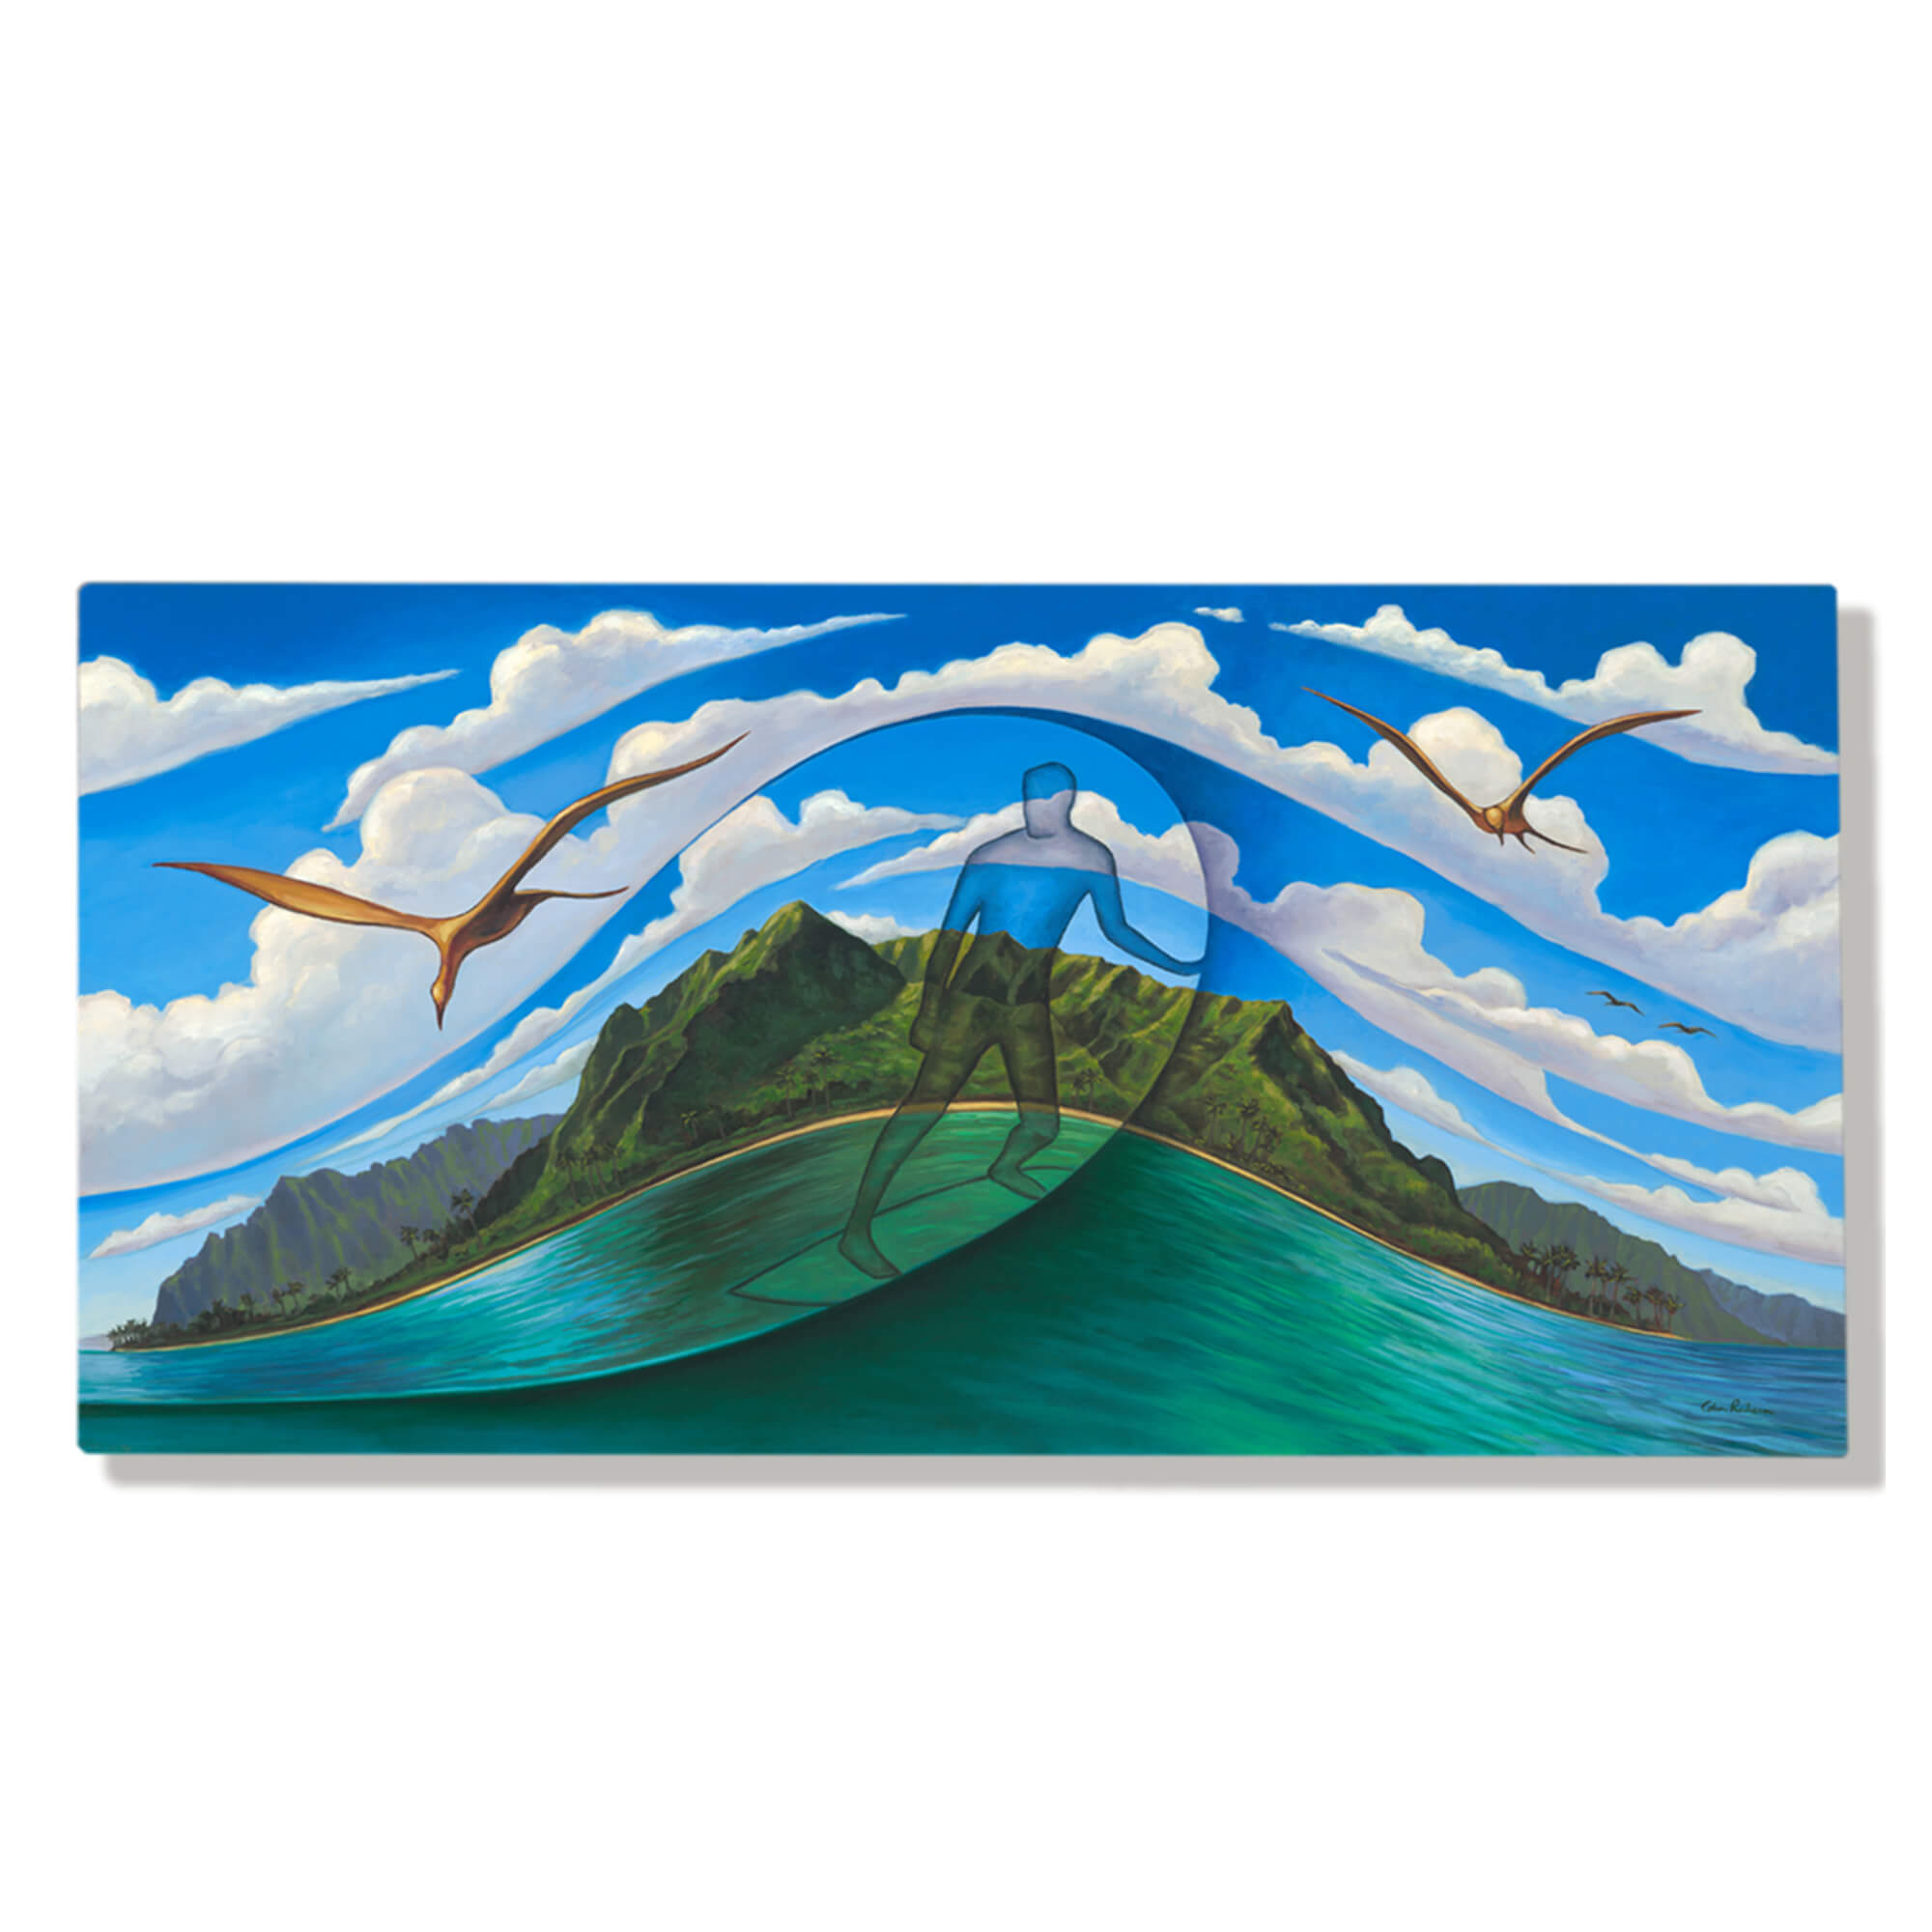 A man on a surfboard and a tropical island by Hawaii artist Colin Redican